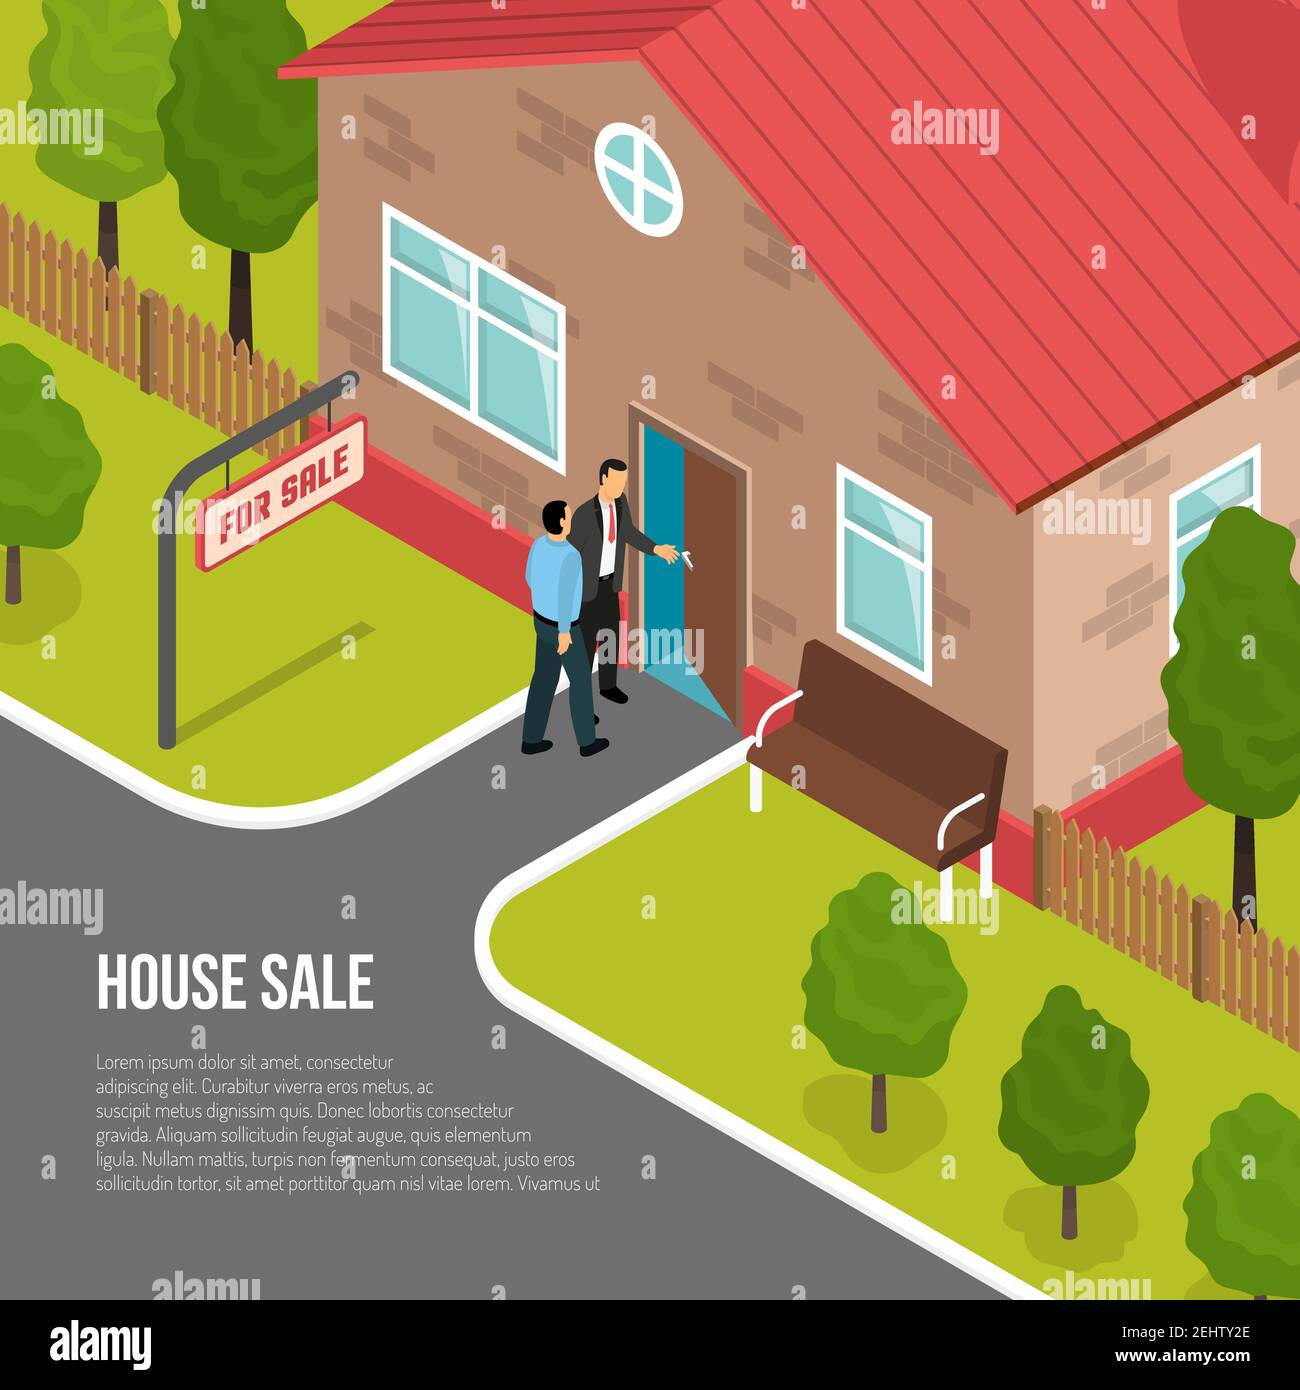 House sale isometric vector illustration with buyer and employee of real estate agency showing one storey cottage Stock Vector